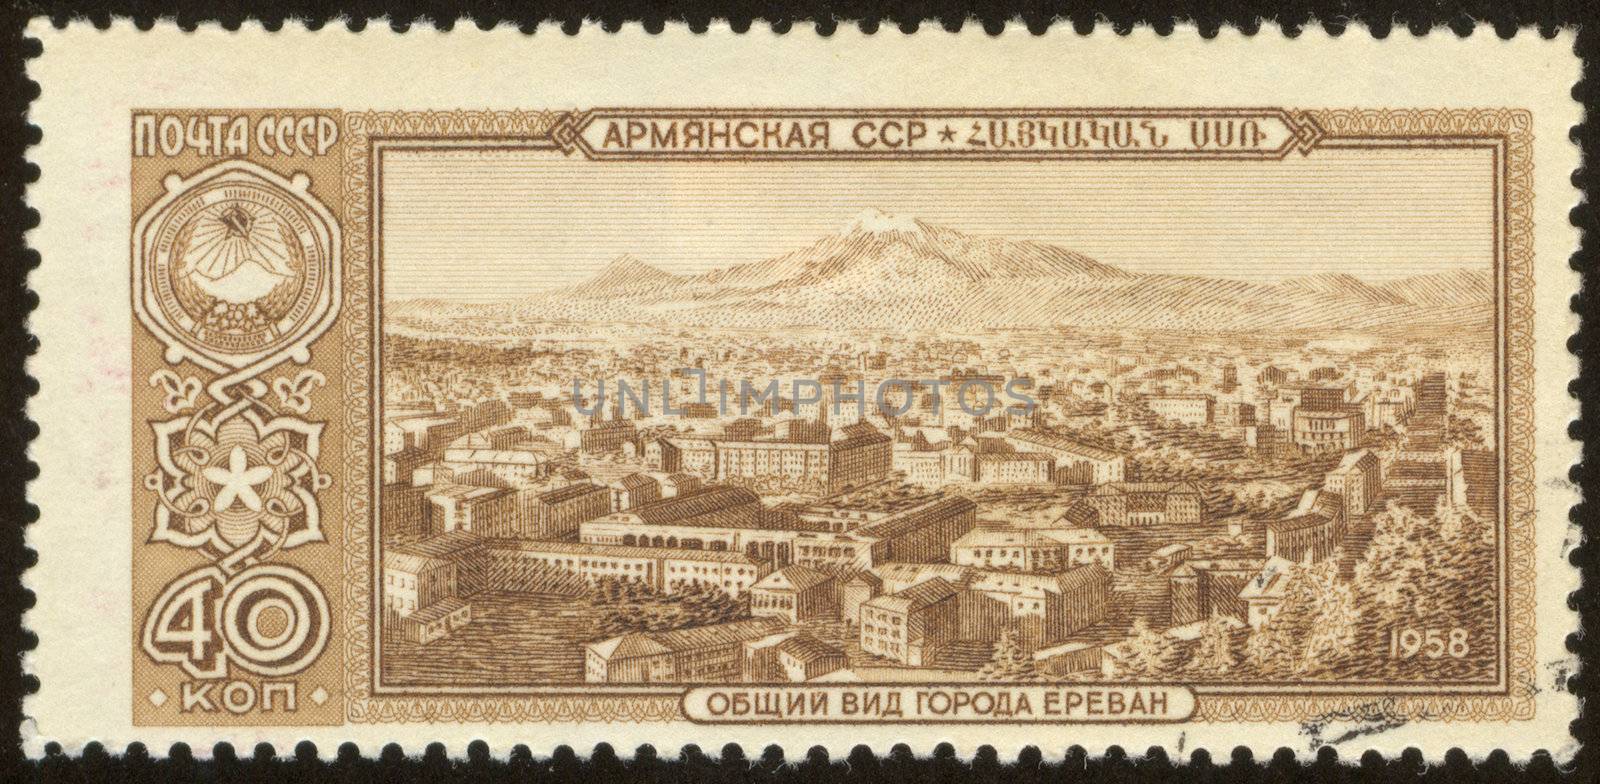 The scanned stamp. The Soviet stamp. The city of Yerevan, capital of Armenia.